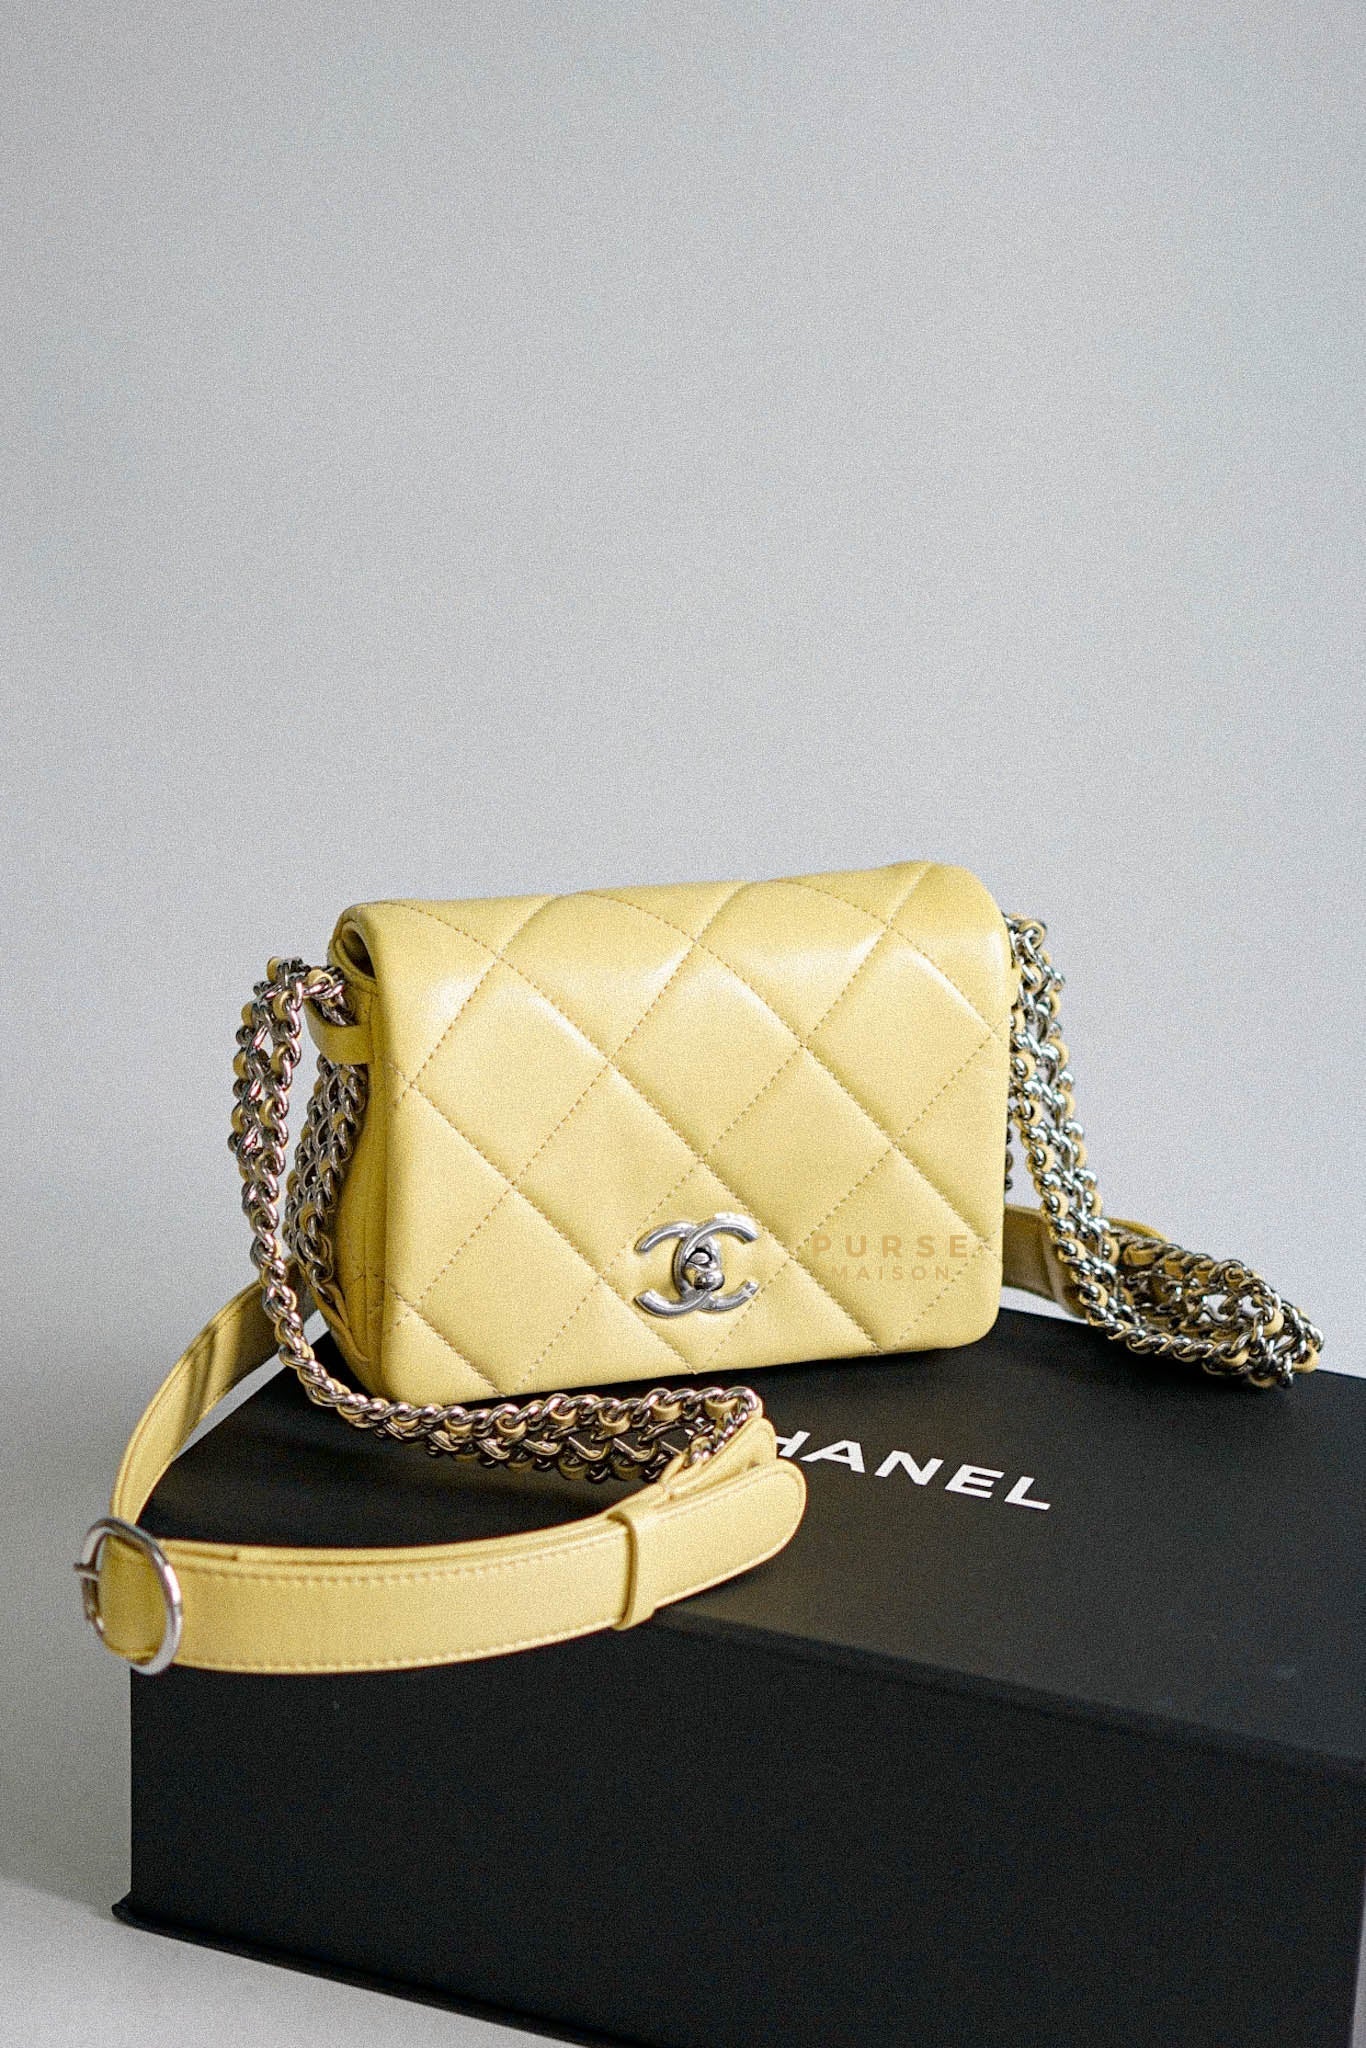 Chanel CC Triple Chain Full Flap Bag in Yellow Quilted Lambskin and Silver Hardware (Microchip) | Purse Maison Luxury Bags Shop